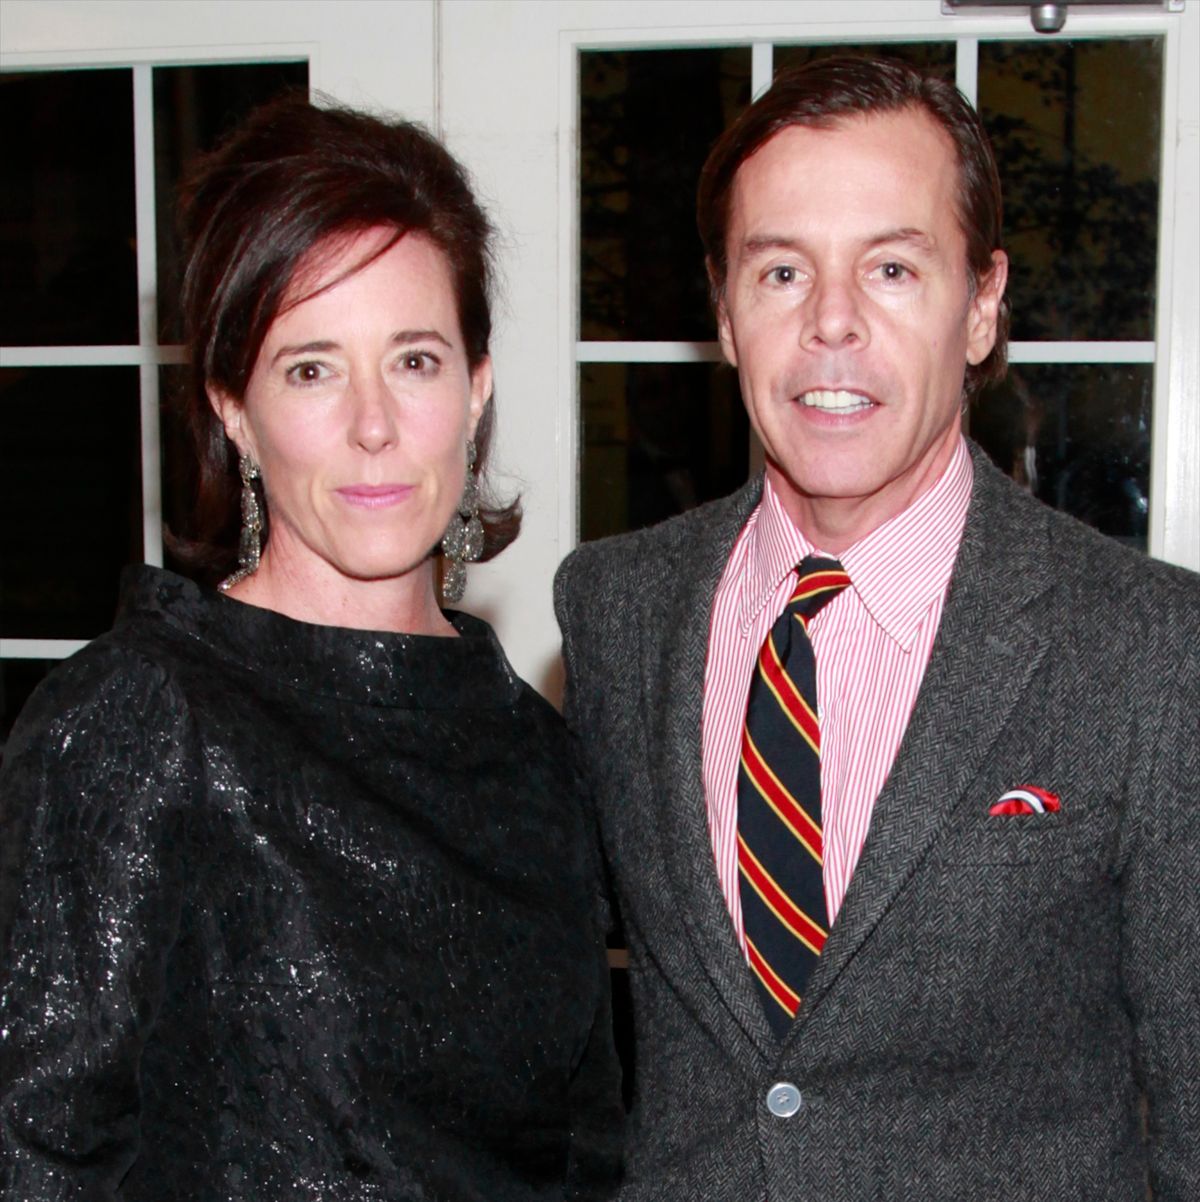 Andy Spade on Kate Spade's Death: 'There Was No Indication and No